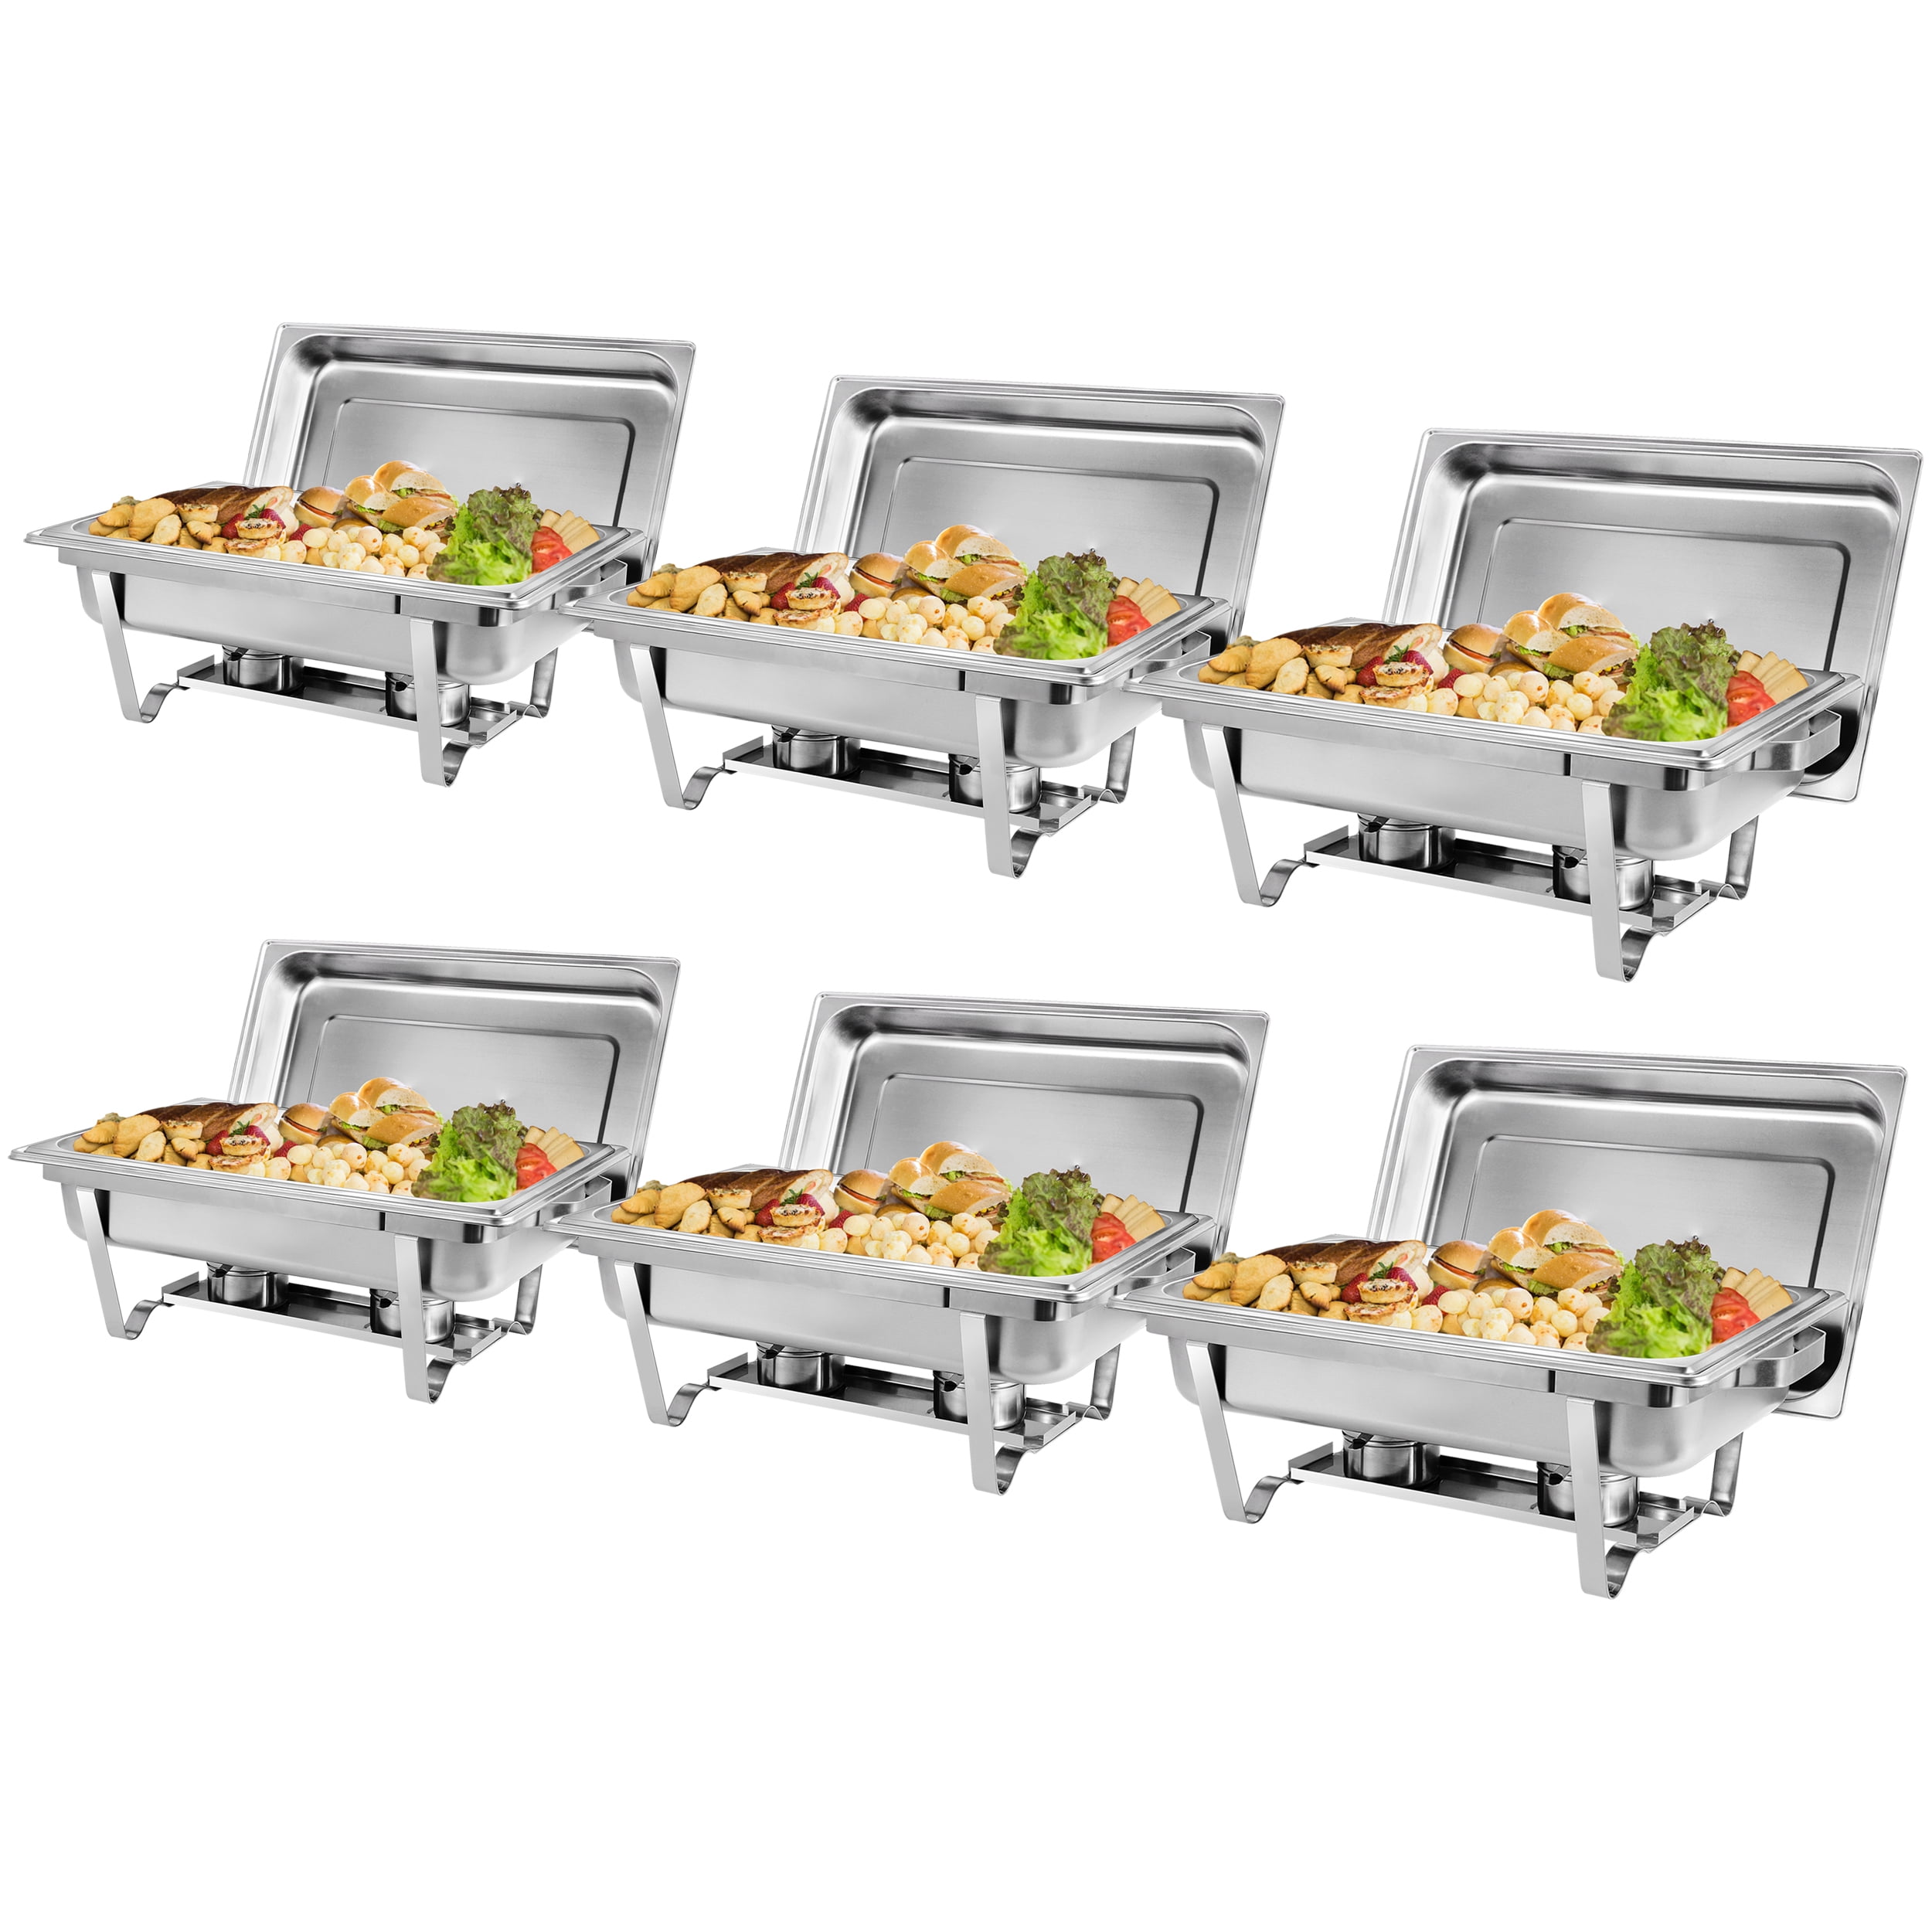 Chafing Dish Buffet Set 8 Qt Stainless Steel Chafer Catering Server Warming Tray 